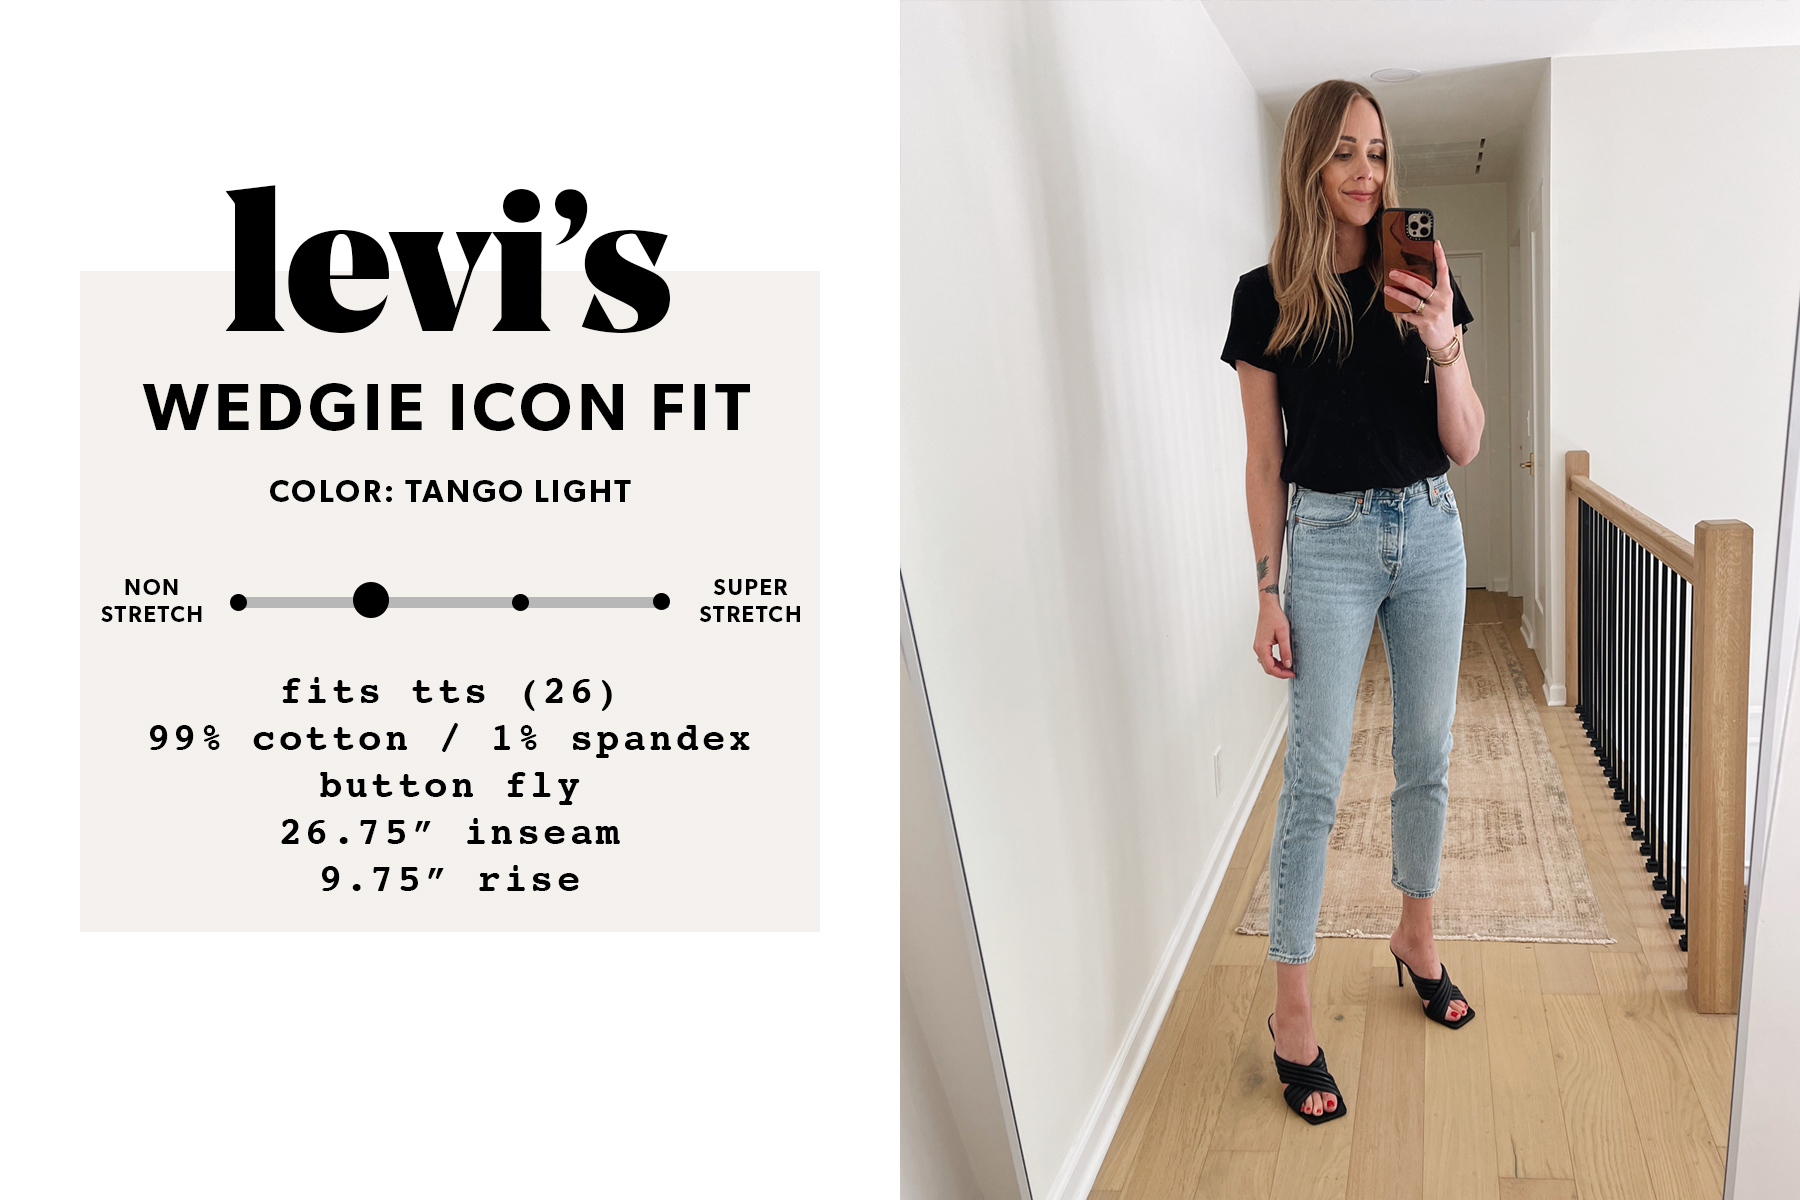 metaal Supplement oplichter The Complete Guide to Buying Levi's Jeans for Women - Fashion Jackson